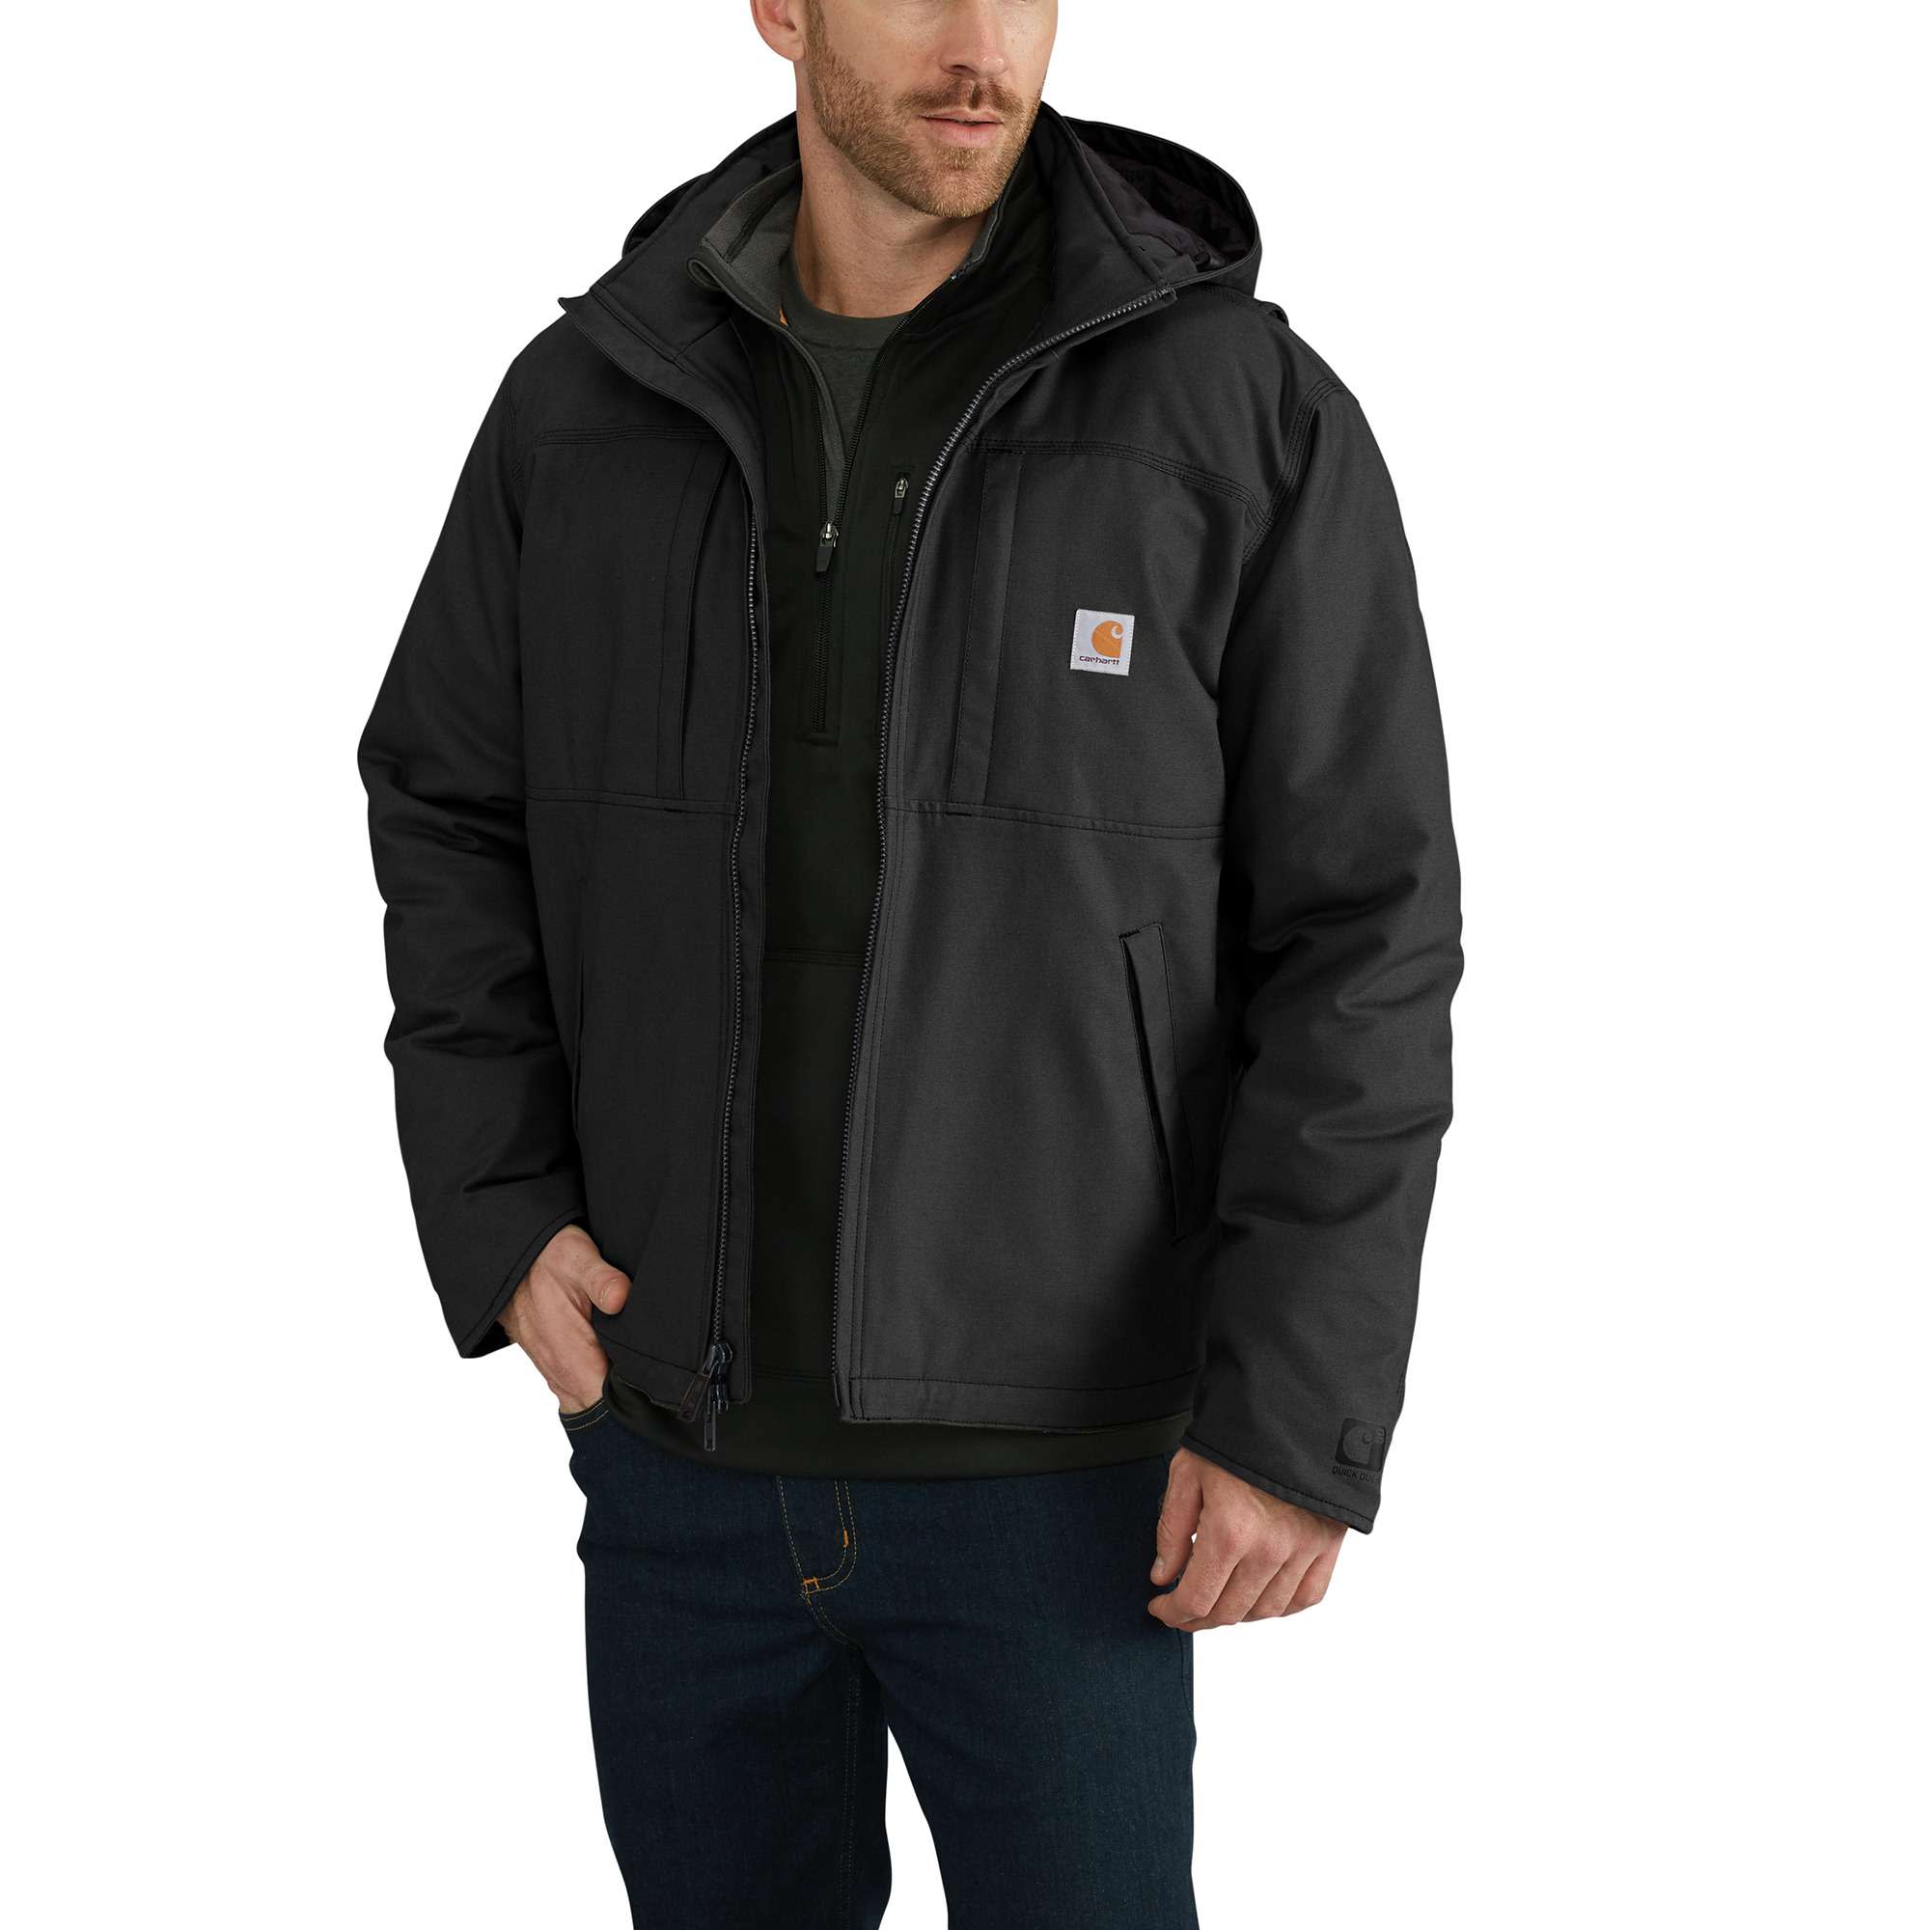 Full Swing® Loose Fit Quick Duck Insulated Jacket - 3 Warmest 